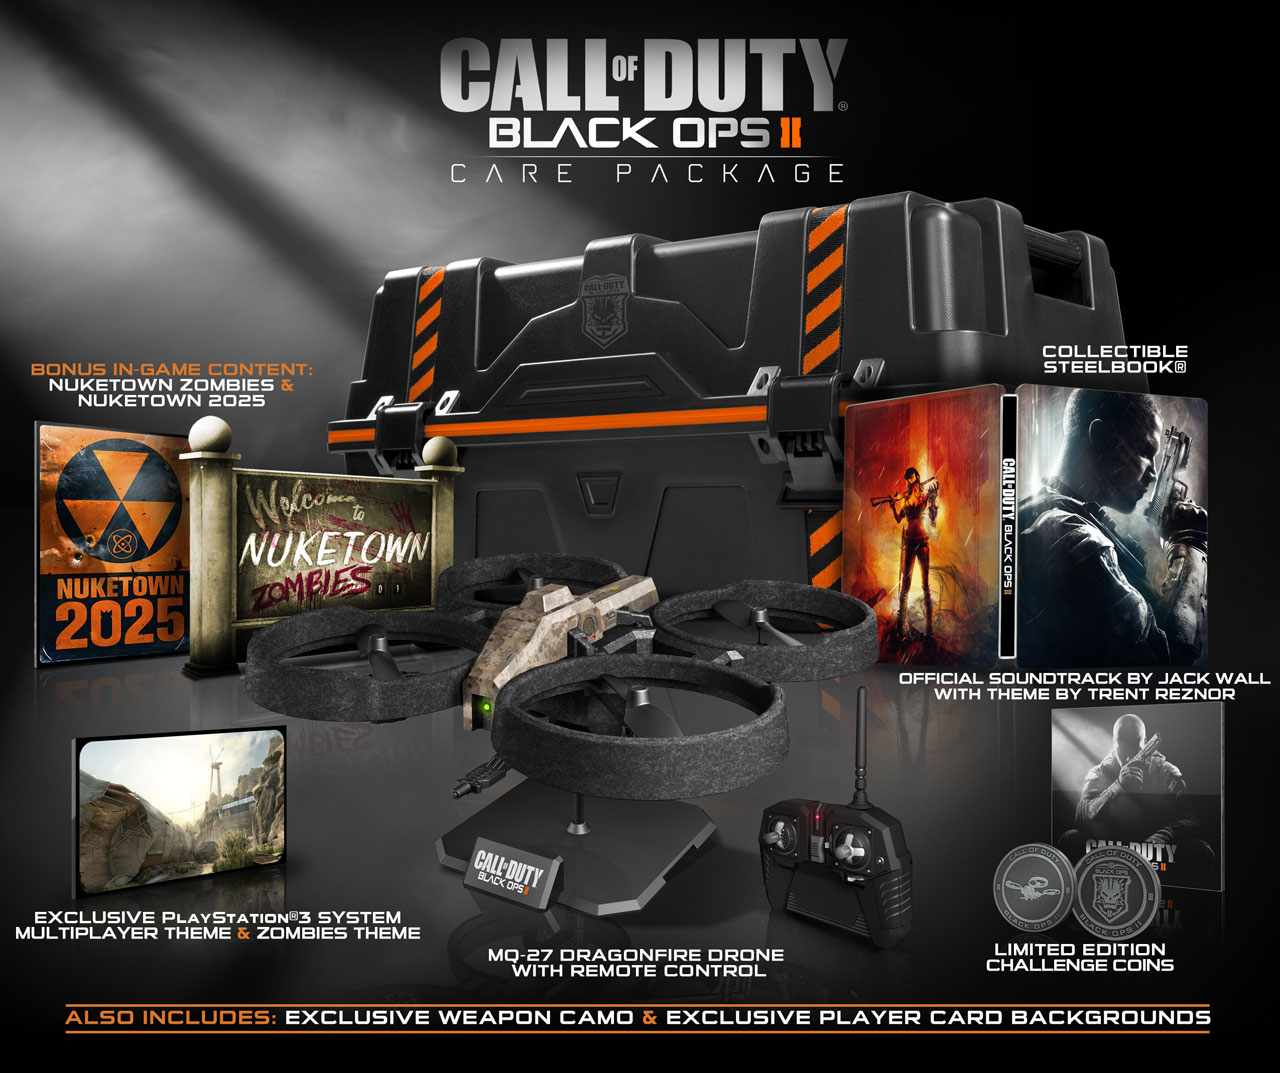 PS3 - Call of Duty Black Ops 2 Care Package